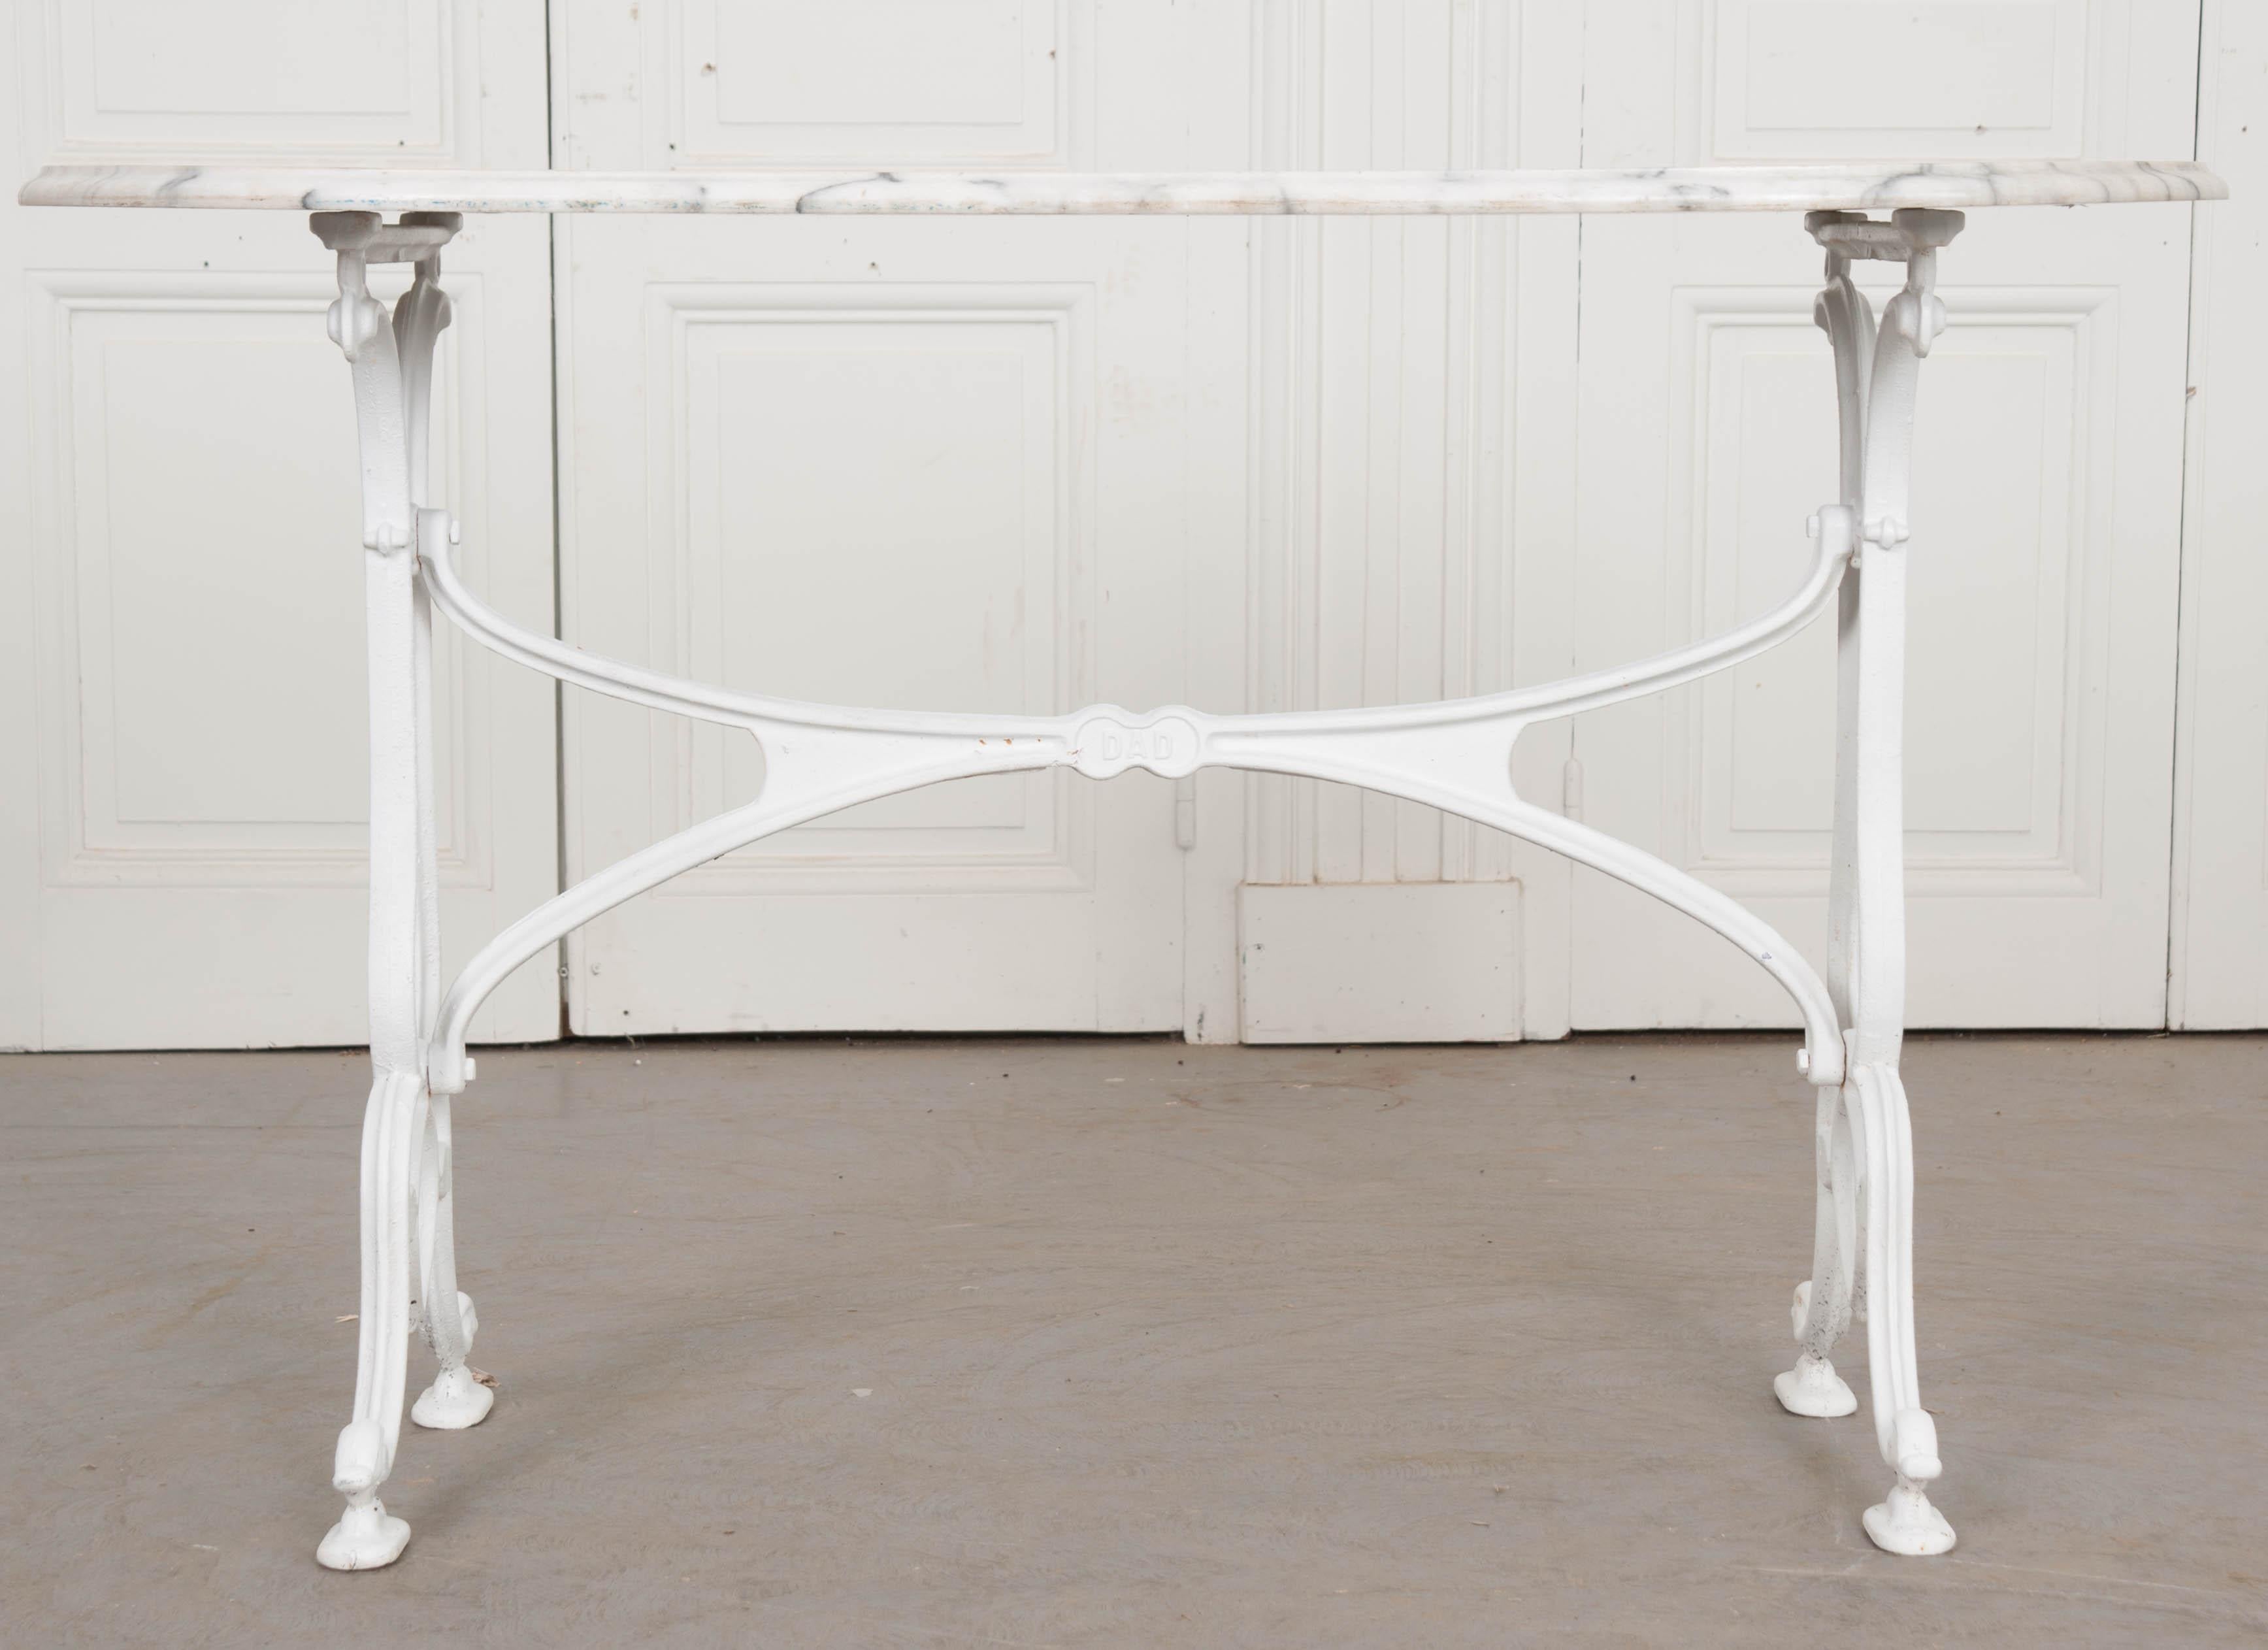 A classically styled French bistro table, made there just after the turn of the 20th century. The table features a white marble top, with gray veins, that is in a capsule shape and in wonderful antique condition. It rests atop the cast iron base